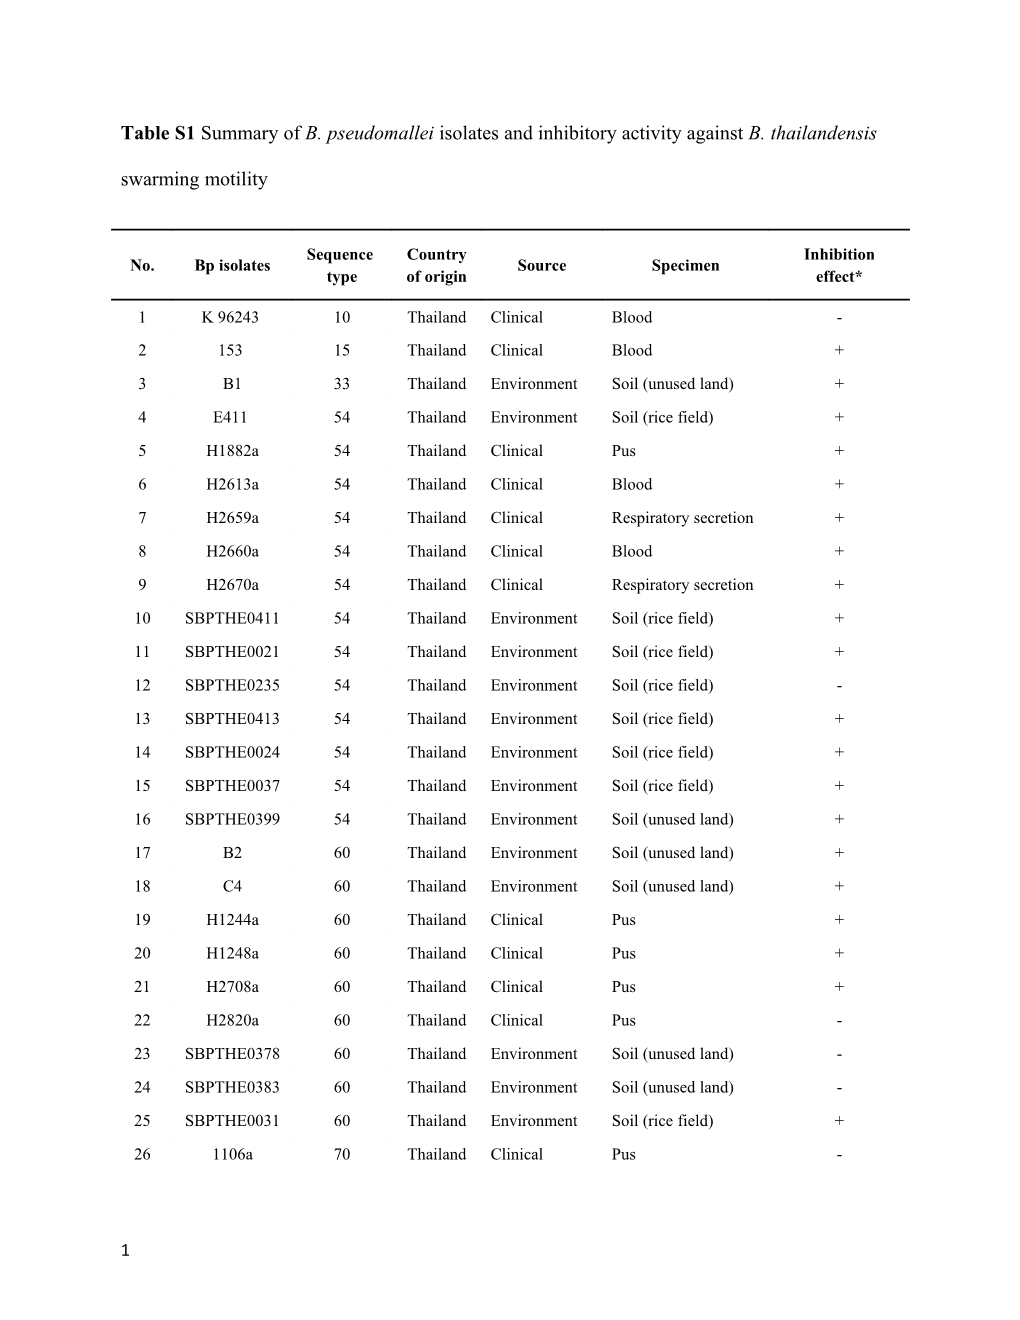 Table S1 Summary of B. Pseudomallei Isolates and Inhibitory Activity Against B. Thailandensis